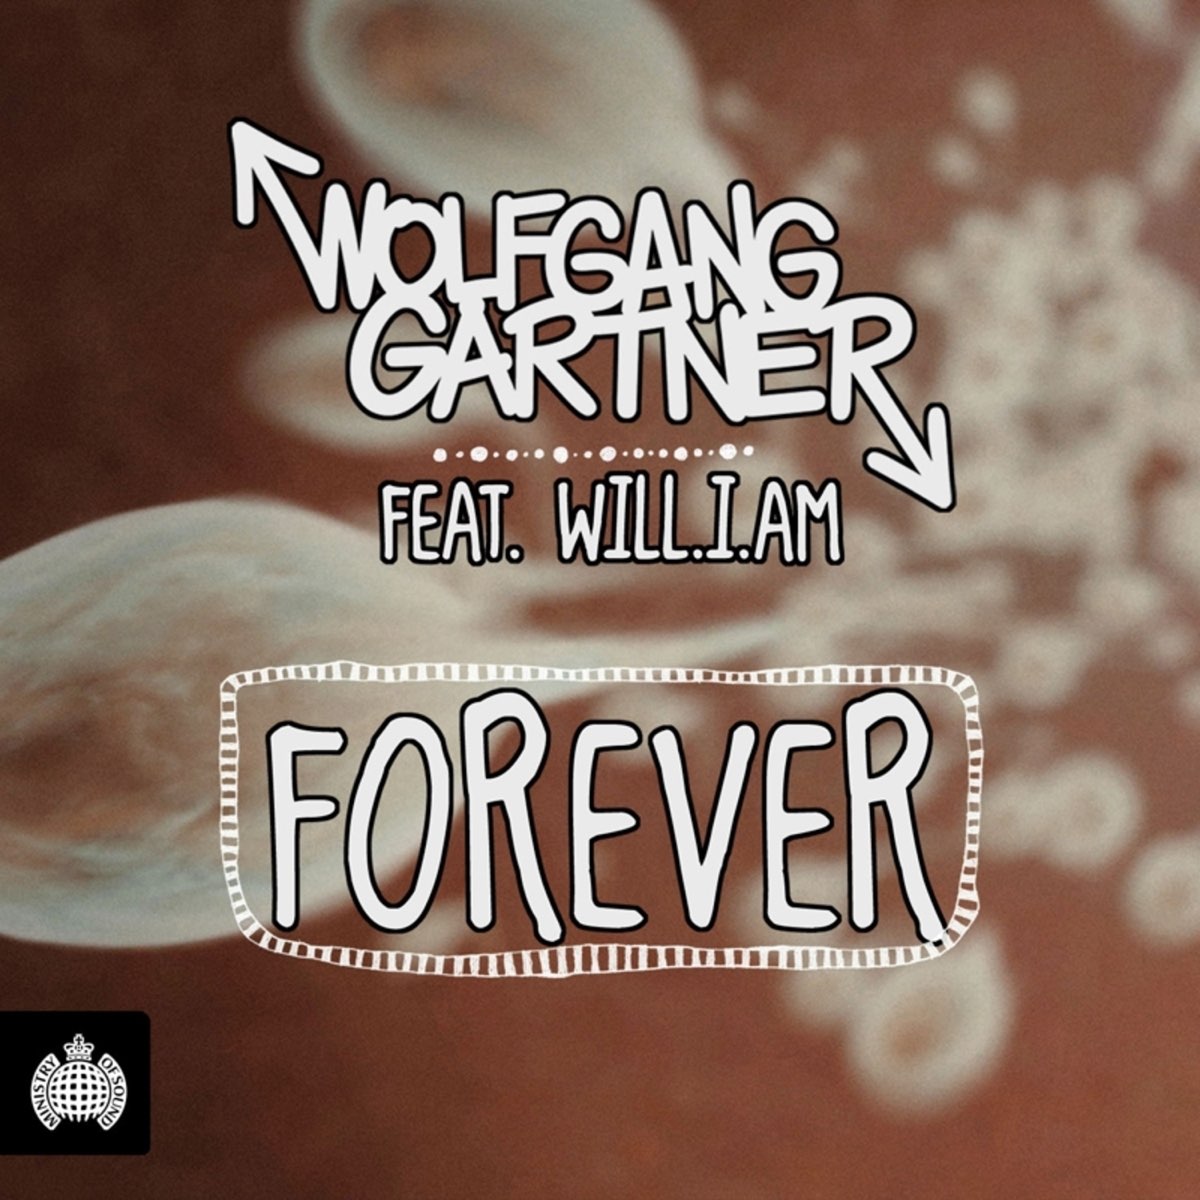 Forever ily Tommy. Tiesto i will be here Wolfgang Gartner Remix. Wolfgang Gartner & Loadstar - Illmerica (RMX). I am what i am Remixes. Forever ilytommy перевод на русский